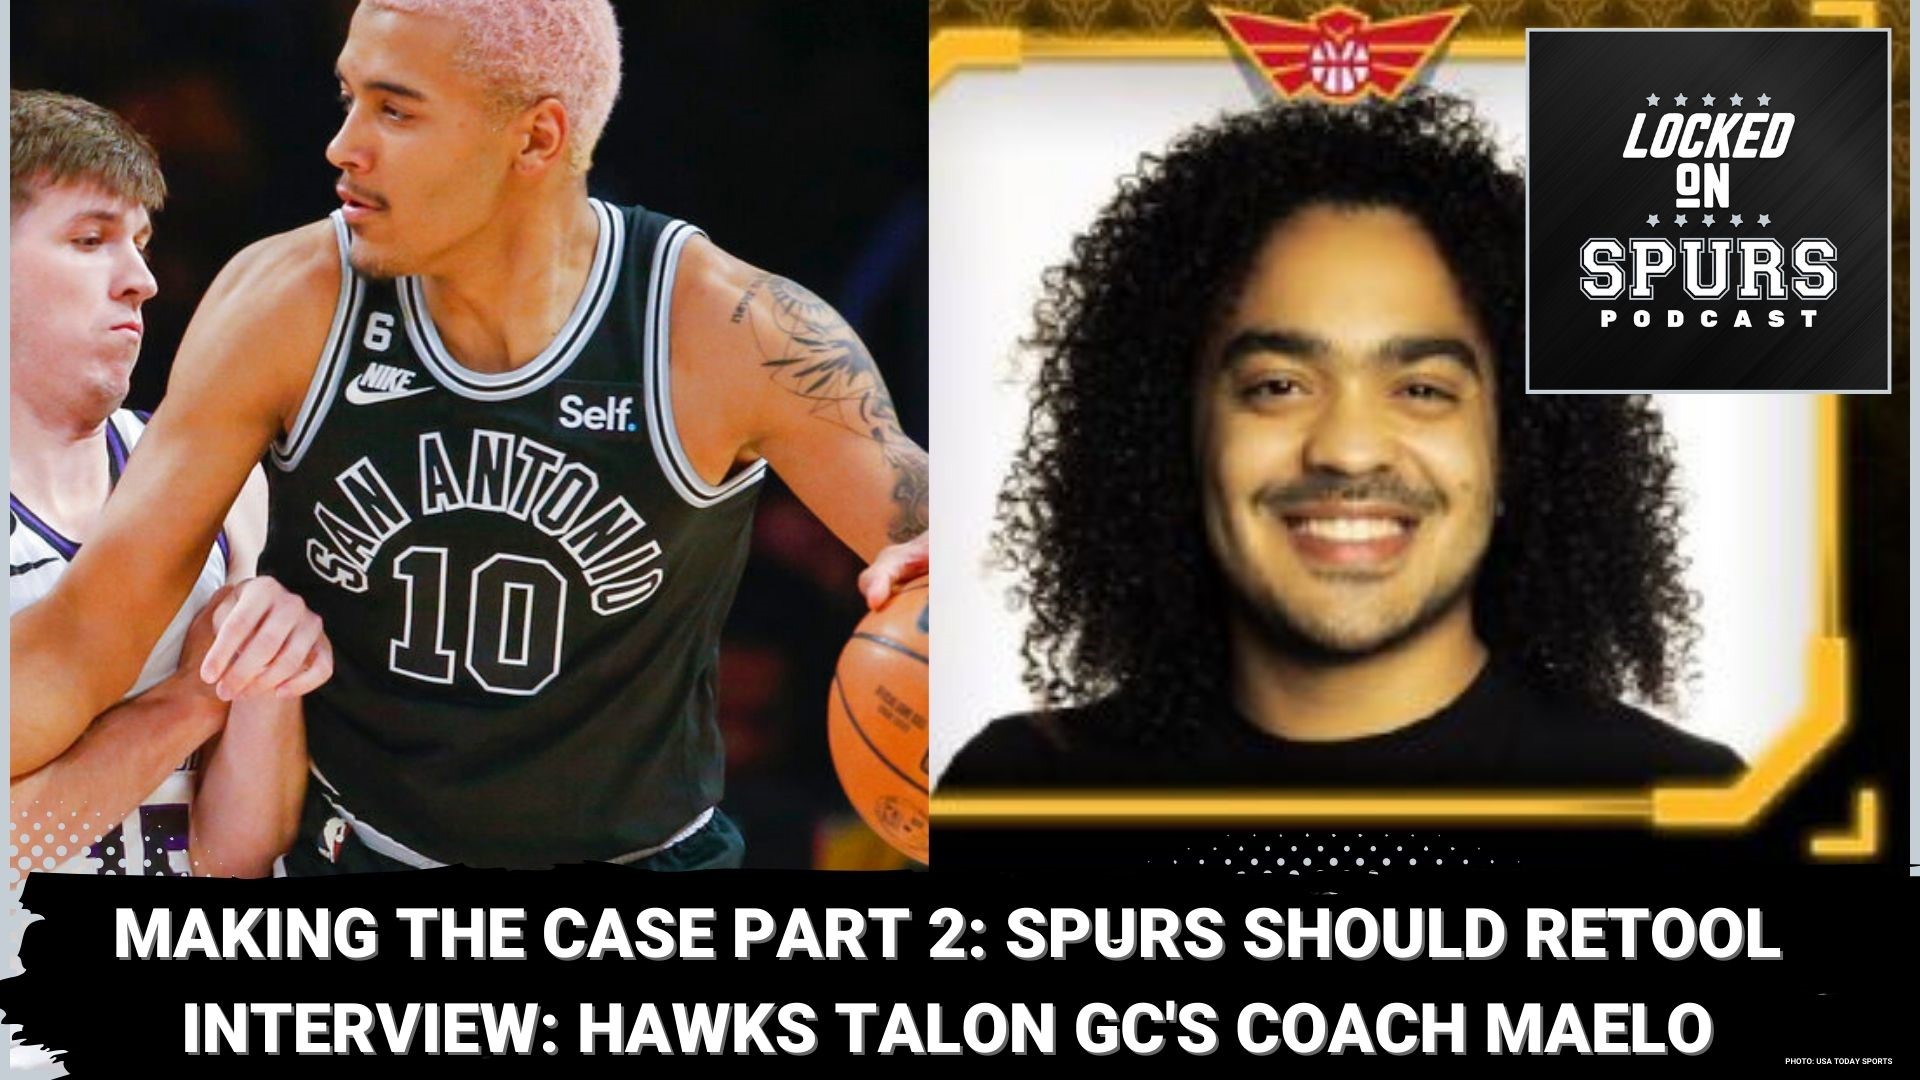 In part two we ask if the Spurs should just retool the roster this offseason.